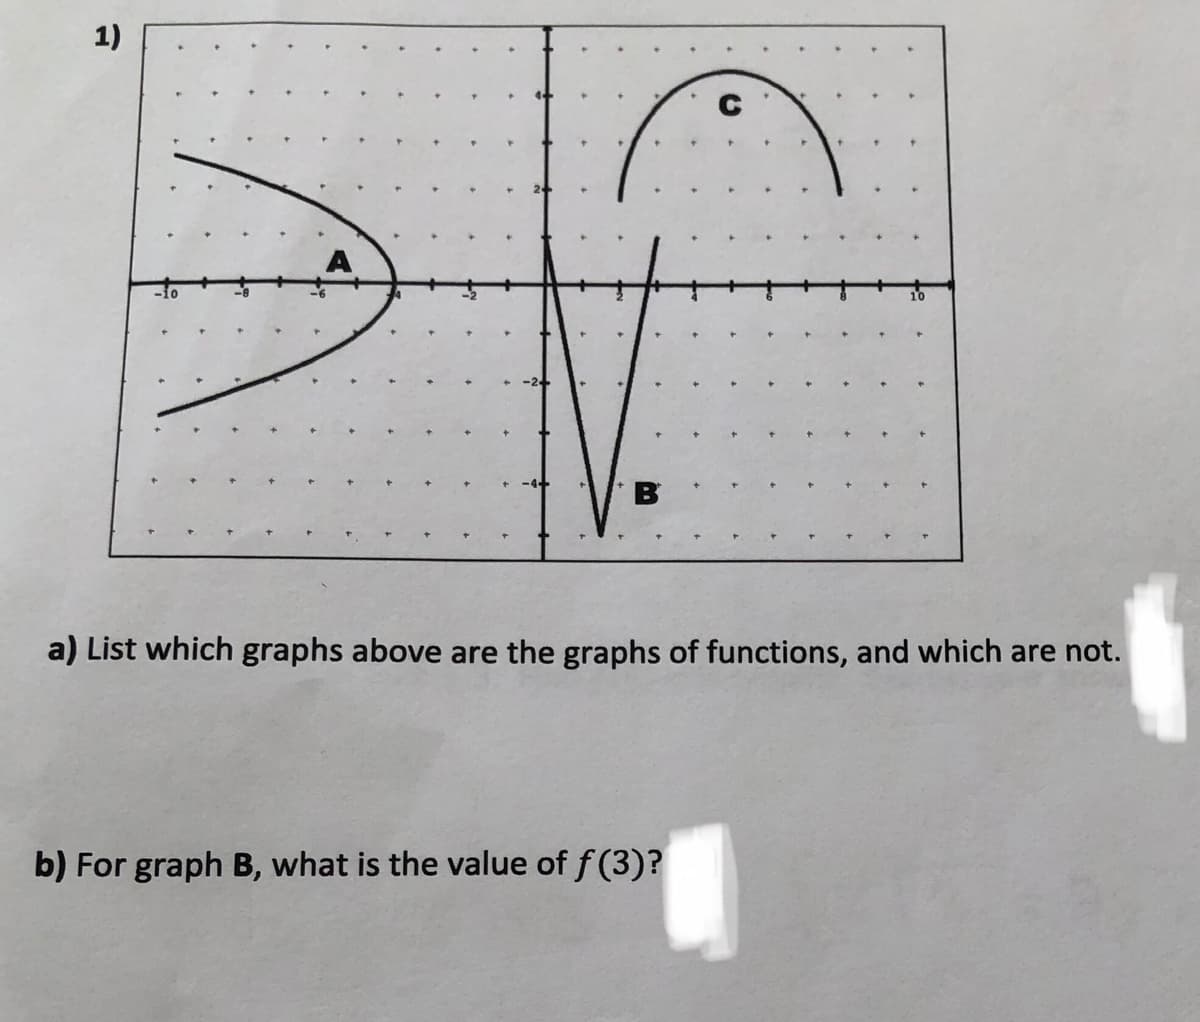 1)
A
a) List which graphs above are the graphs of functions, and which are not.
b) For graph B, what is the value of f (3)?
